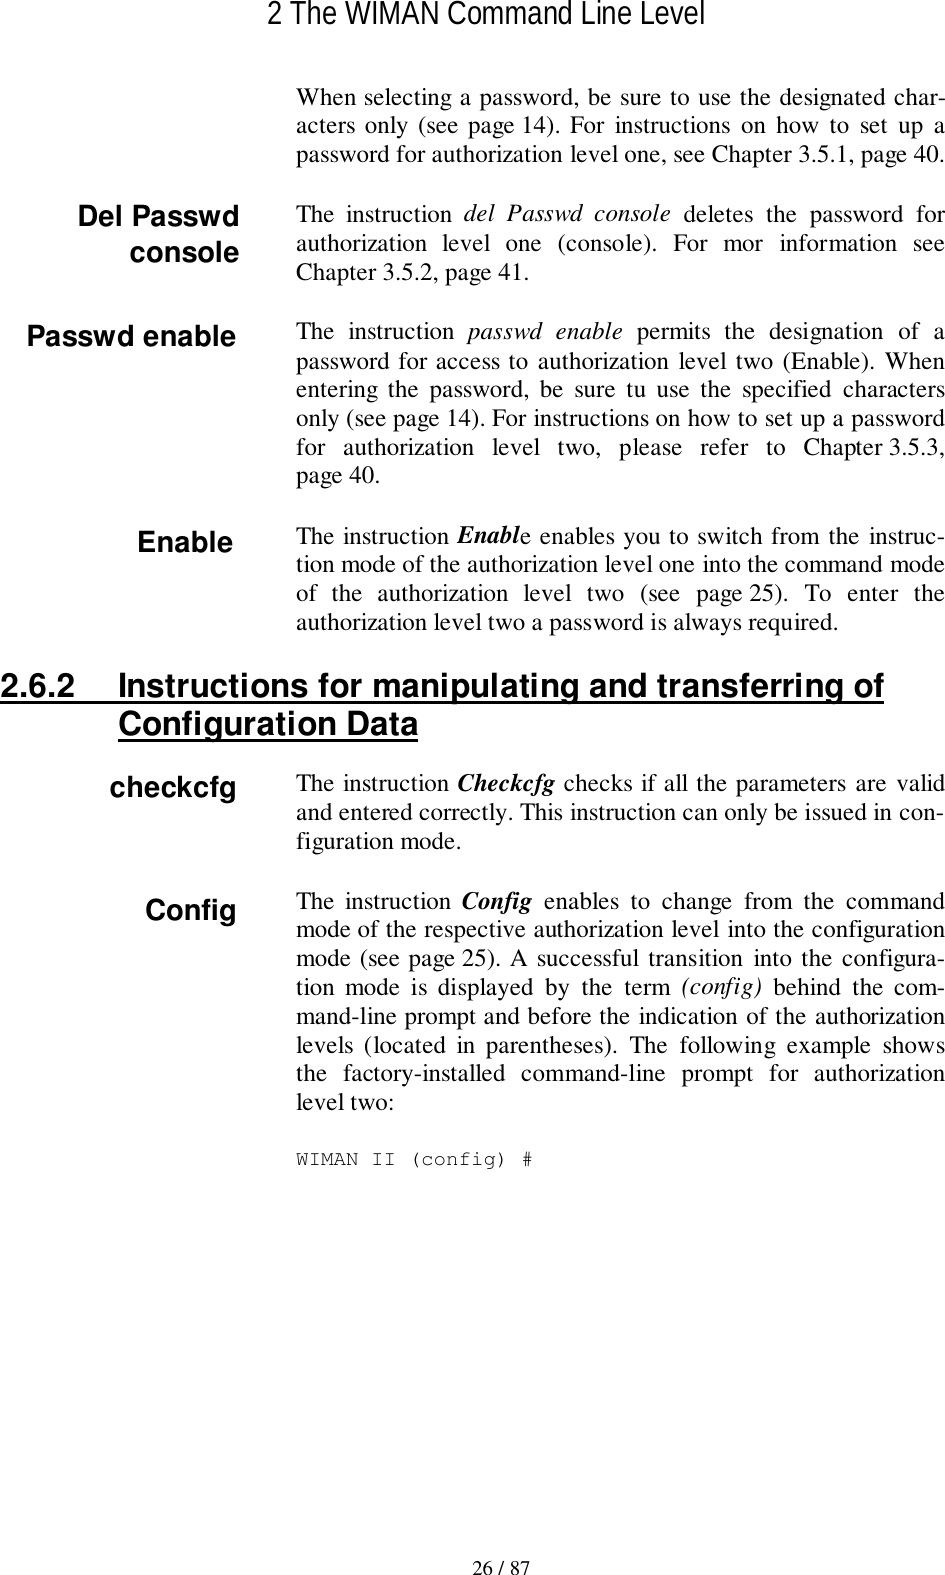 2 The WIMAN Command Line Level26 / 87When selecting a password, be sure to use the designated char-acters only (see page 14). For instructions on how to set up apassword for authorization level one, see Chapter 3.5.1, page 40.The instruction del Passwd console deletes the password forauthorization level one (console). For mor information seeChapter 3.5.2, page 41.The instruction passwd enable permits the designation of apassword for access to authorization level two (Enable). Whenentering the password, be sure tu use the specified charactersonly (see page 14). For instructions on how to set up a passwordfor authorization level two, please refer to Chapter 3.5.3,page 40.The instruction Enable enables you to switch from the instruc-tion mode of the authorization level one into the command modeof the authorization level two (see page 25). To enter theauthorization level two a password is always required.2.6.2  Instructions for manipulating and transferring ofConfiguration DataThe instruction Checkcfg checks if all the parameters are validand entered correctly. This instruction can only be issued in con-figuration mode.The instruction Config  enables to change from the commandmode of the respective authorization level into the configurationmode (see page 25). A successful transition into the configura-tion mode is displayed by the term (config) behind the com-mand-line prompt and before the indication of the authorizationlevels (located in parentheses). The following example showsthe factory-installed command-line prompt for authorizationlevel two:WIMAN II (config) #Del PasswdconsoleEnableConfigPasswd enablecheckcfg